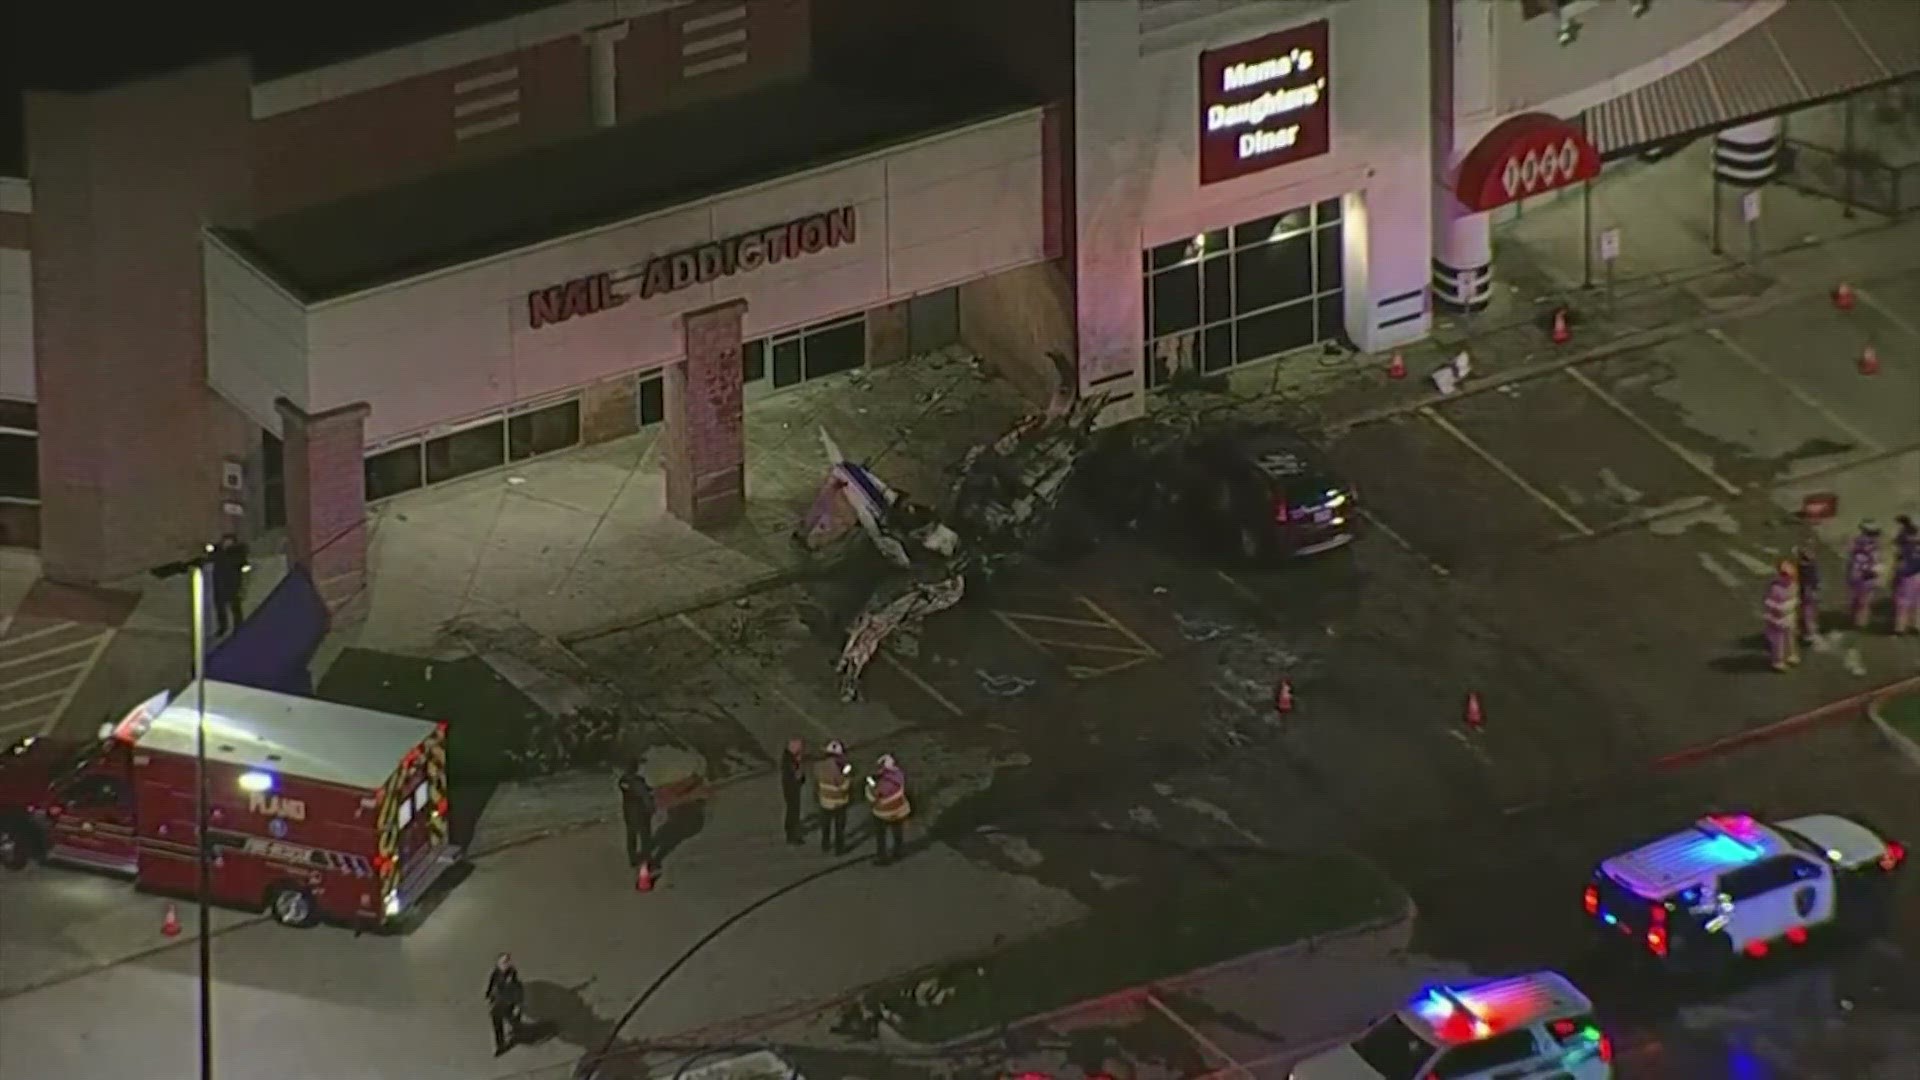 The FAA confirmed that only the pilot was on board when the plane came down at a shopping center.